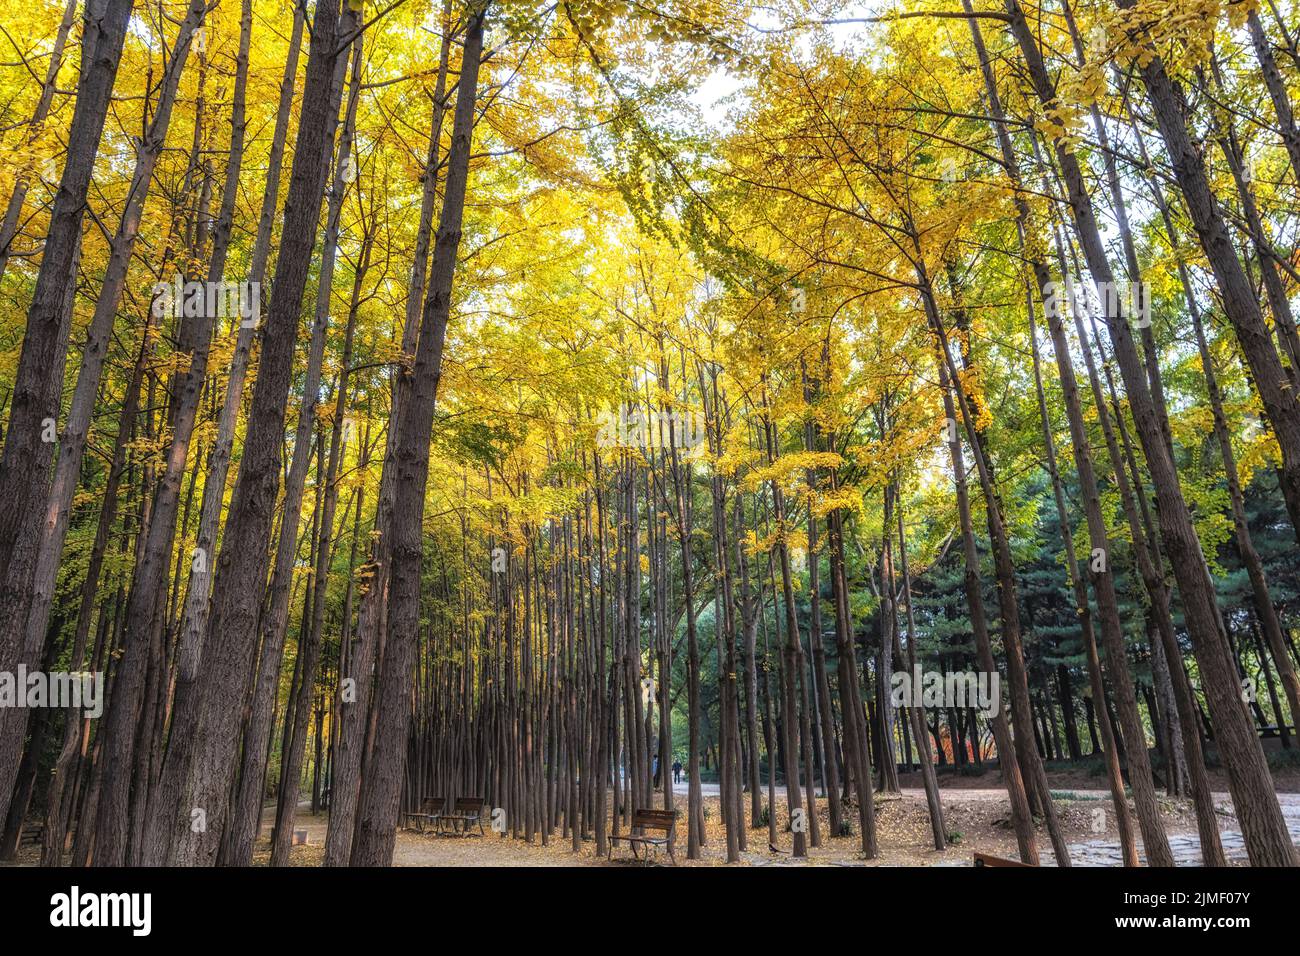 Ginkgo tree forest in Seoul Forest taken during autumn season Stock Photo